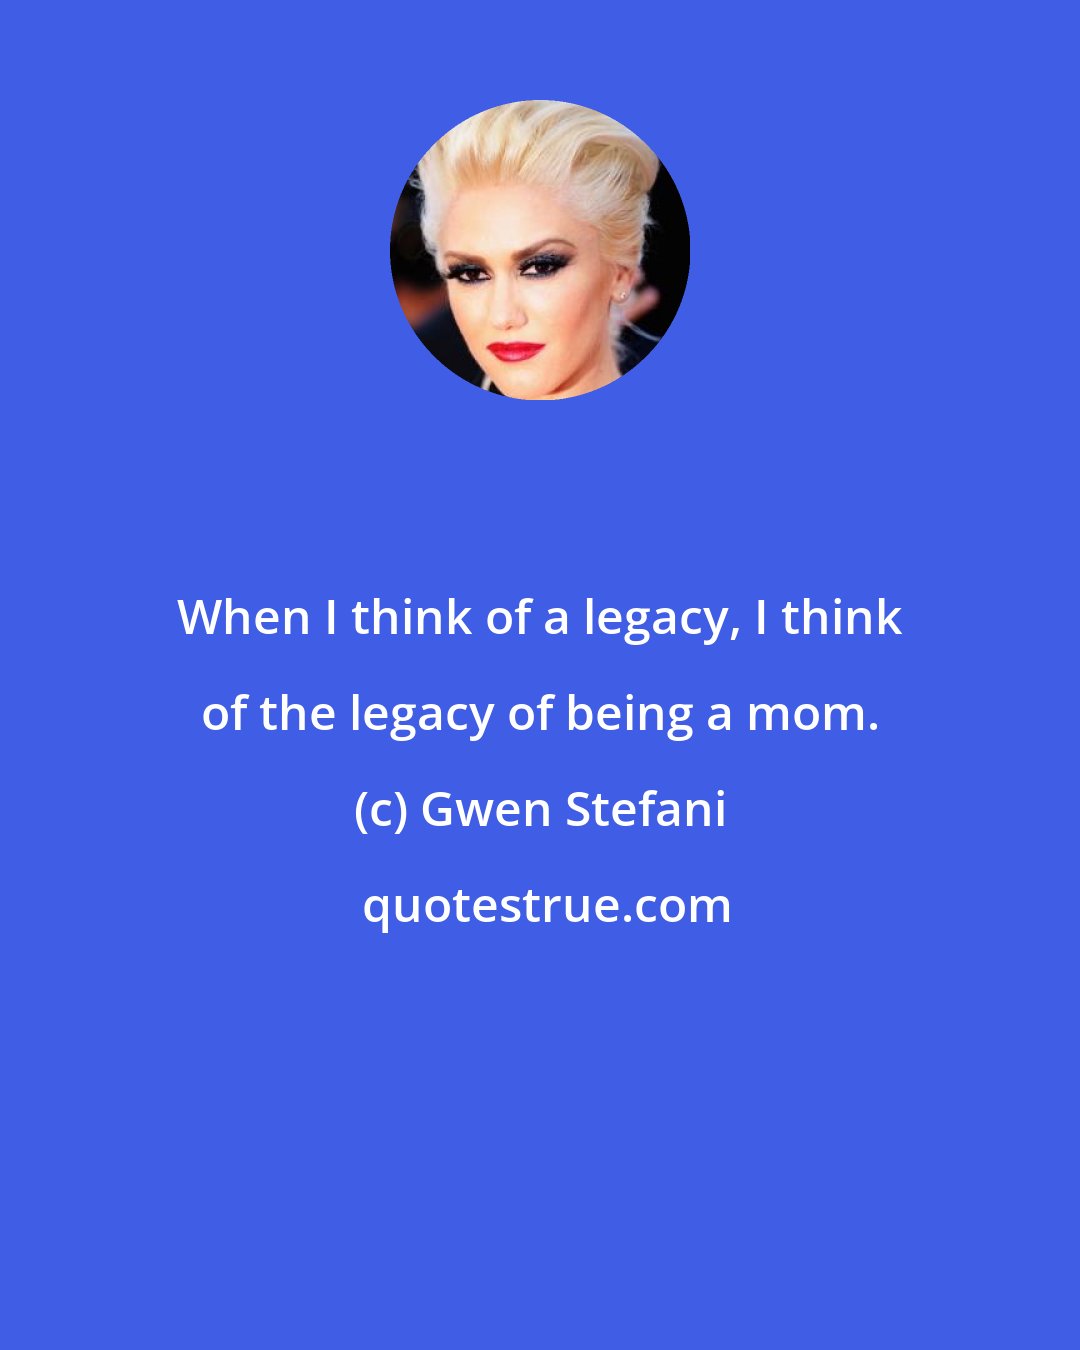 Gwen Stefani: When I think of a legacy, I think of the legacy of being a mom.